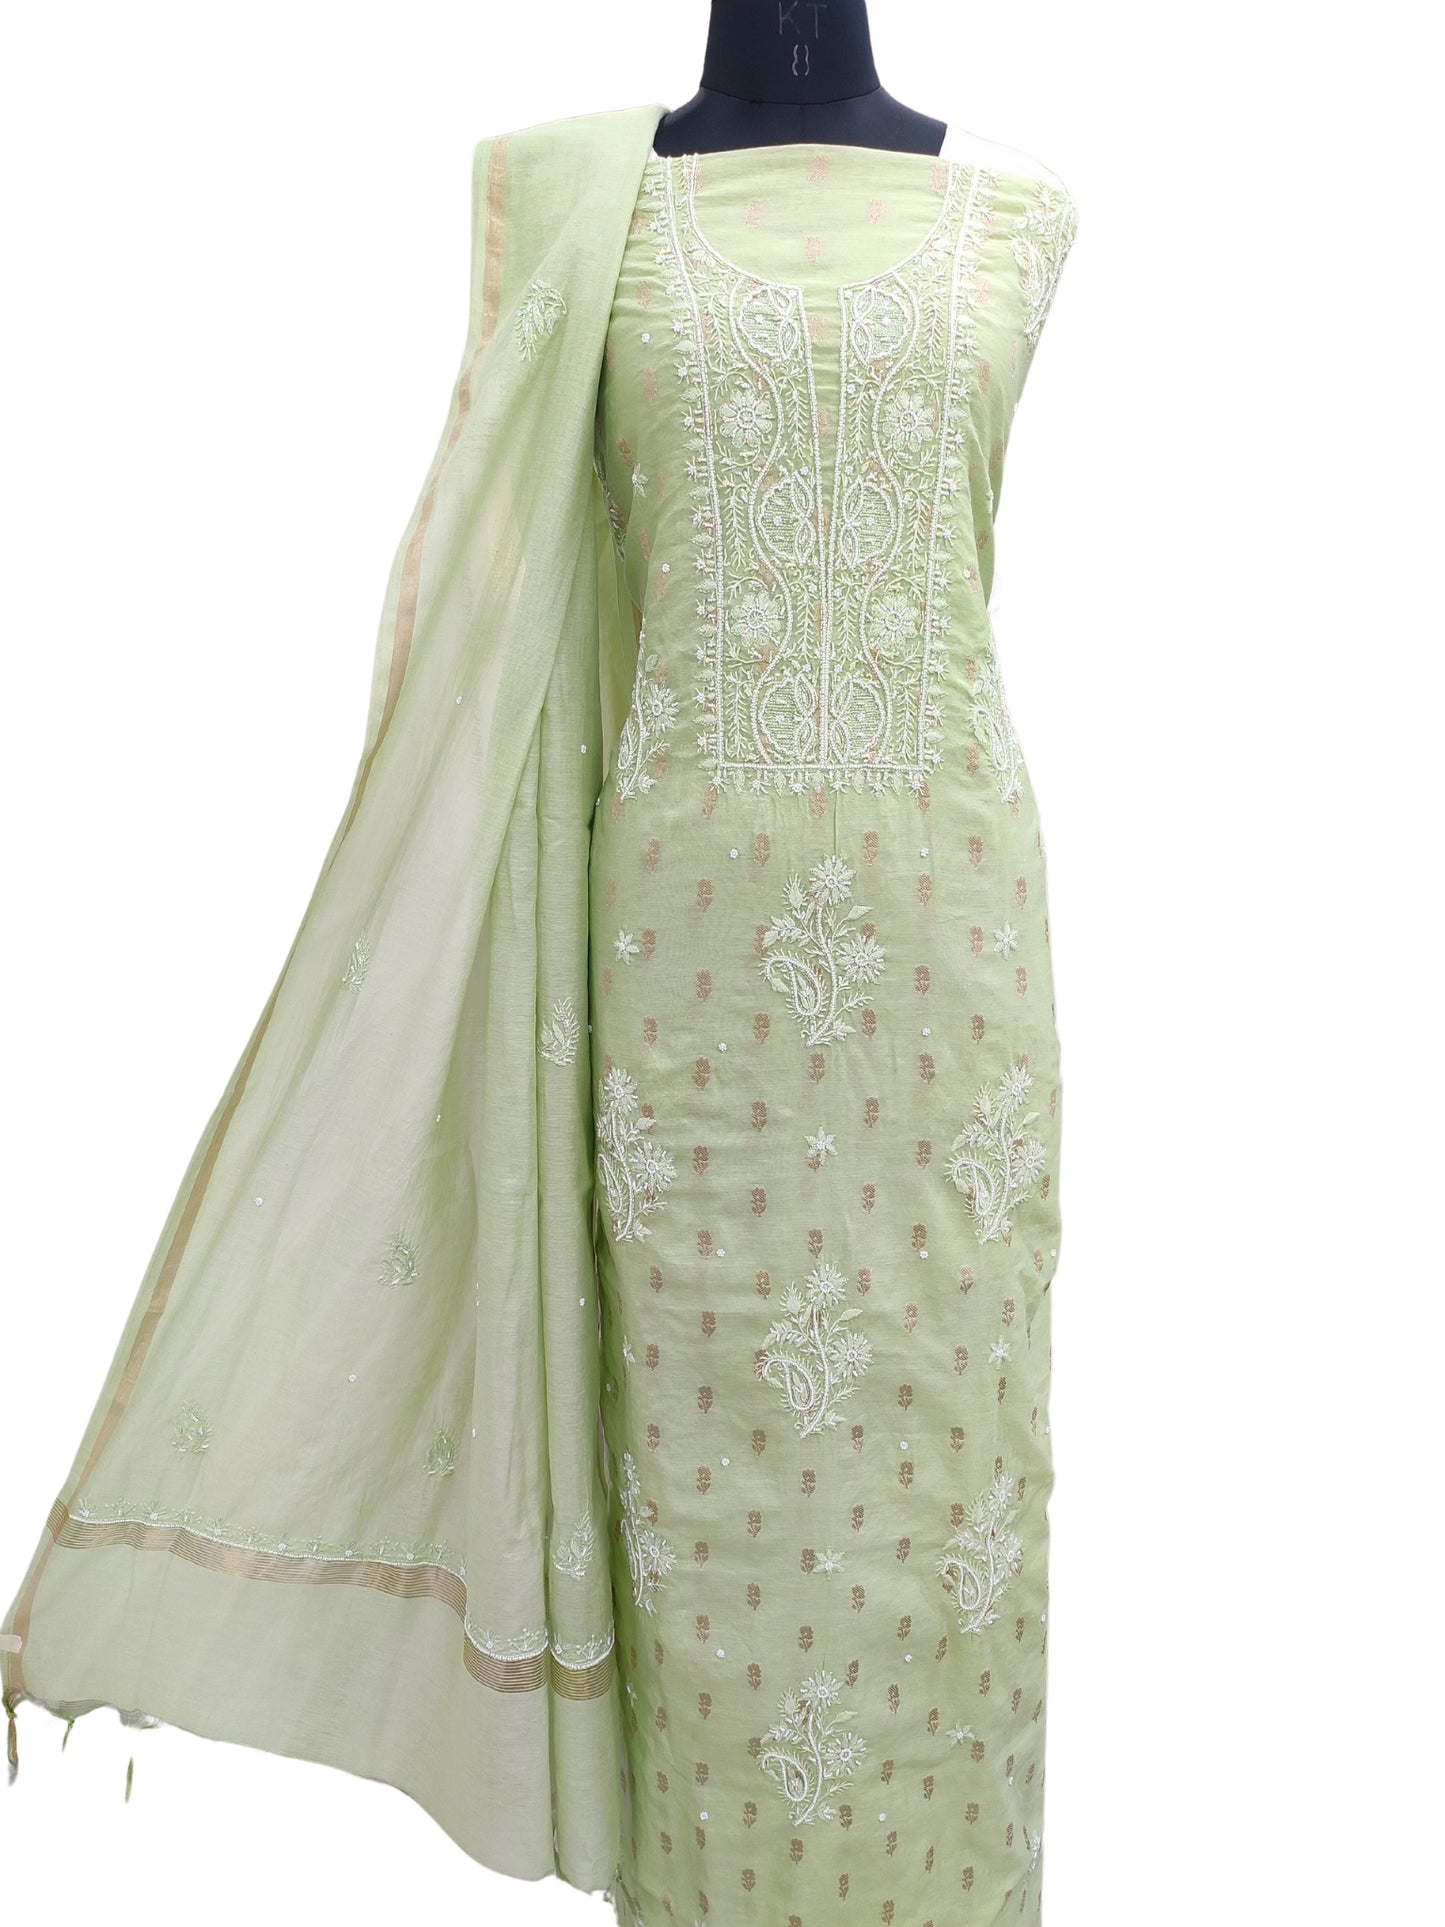 Shyamal Chikan Hand Embroidered Pista Green Chanderi Lucknowi Chikankari Unstitched Suit Piece ( Kurta Dupatta Set ) With Pearl and Sequin Work - S17052